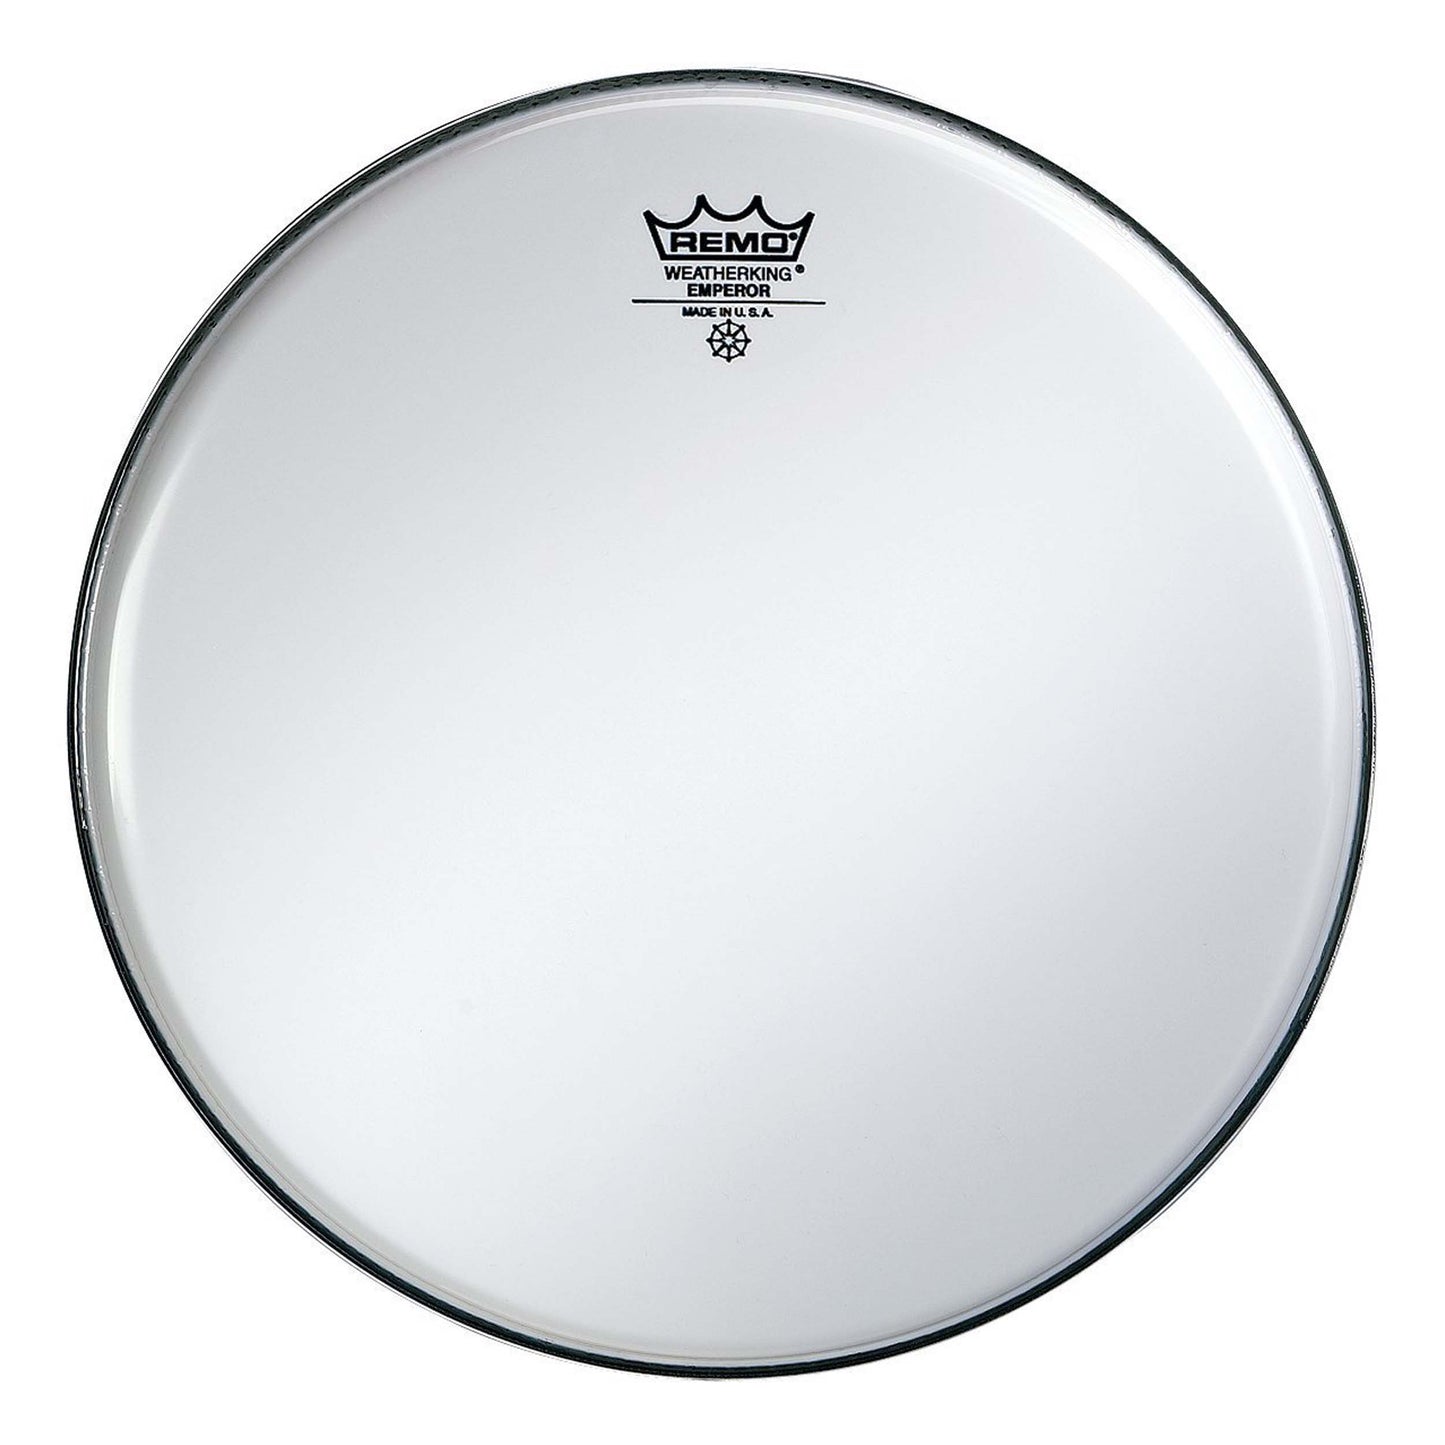 Remo BE0213-00 Smooth White Emperor Drum Head - 13"